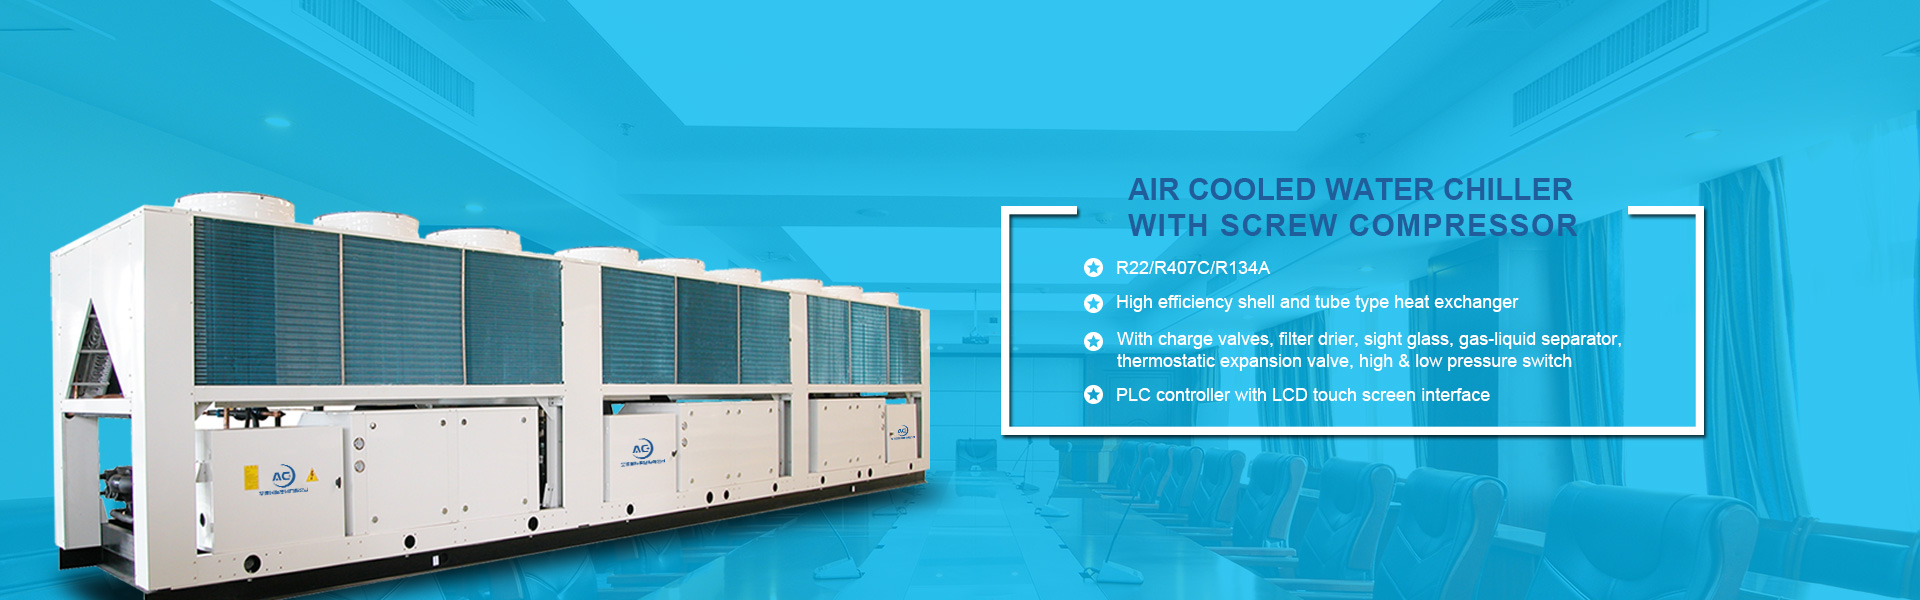 AC+ a professional water chiller central air condition manufacturer